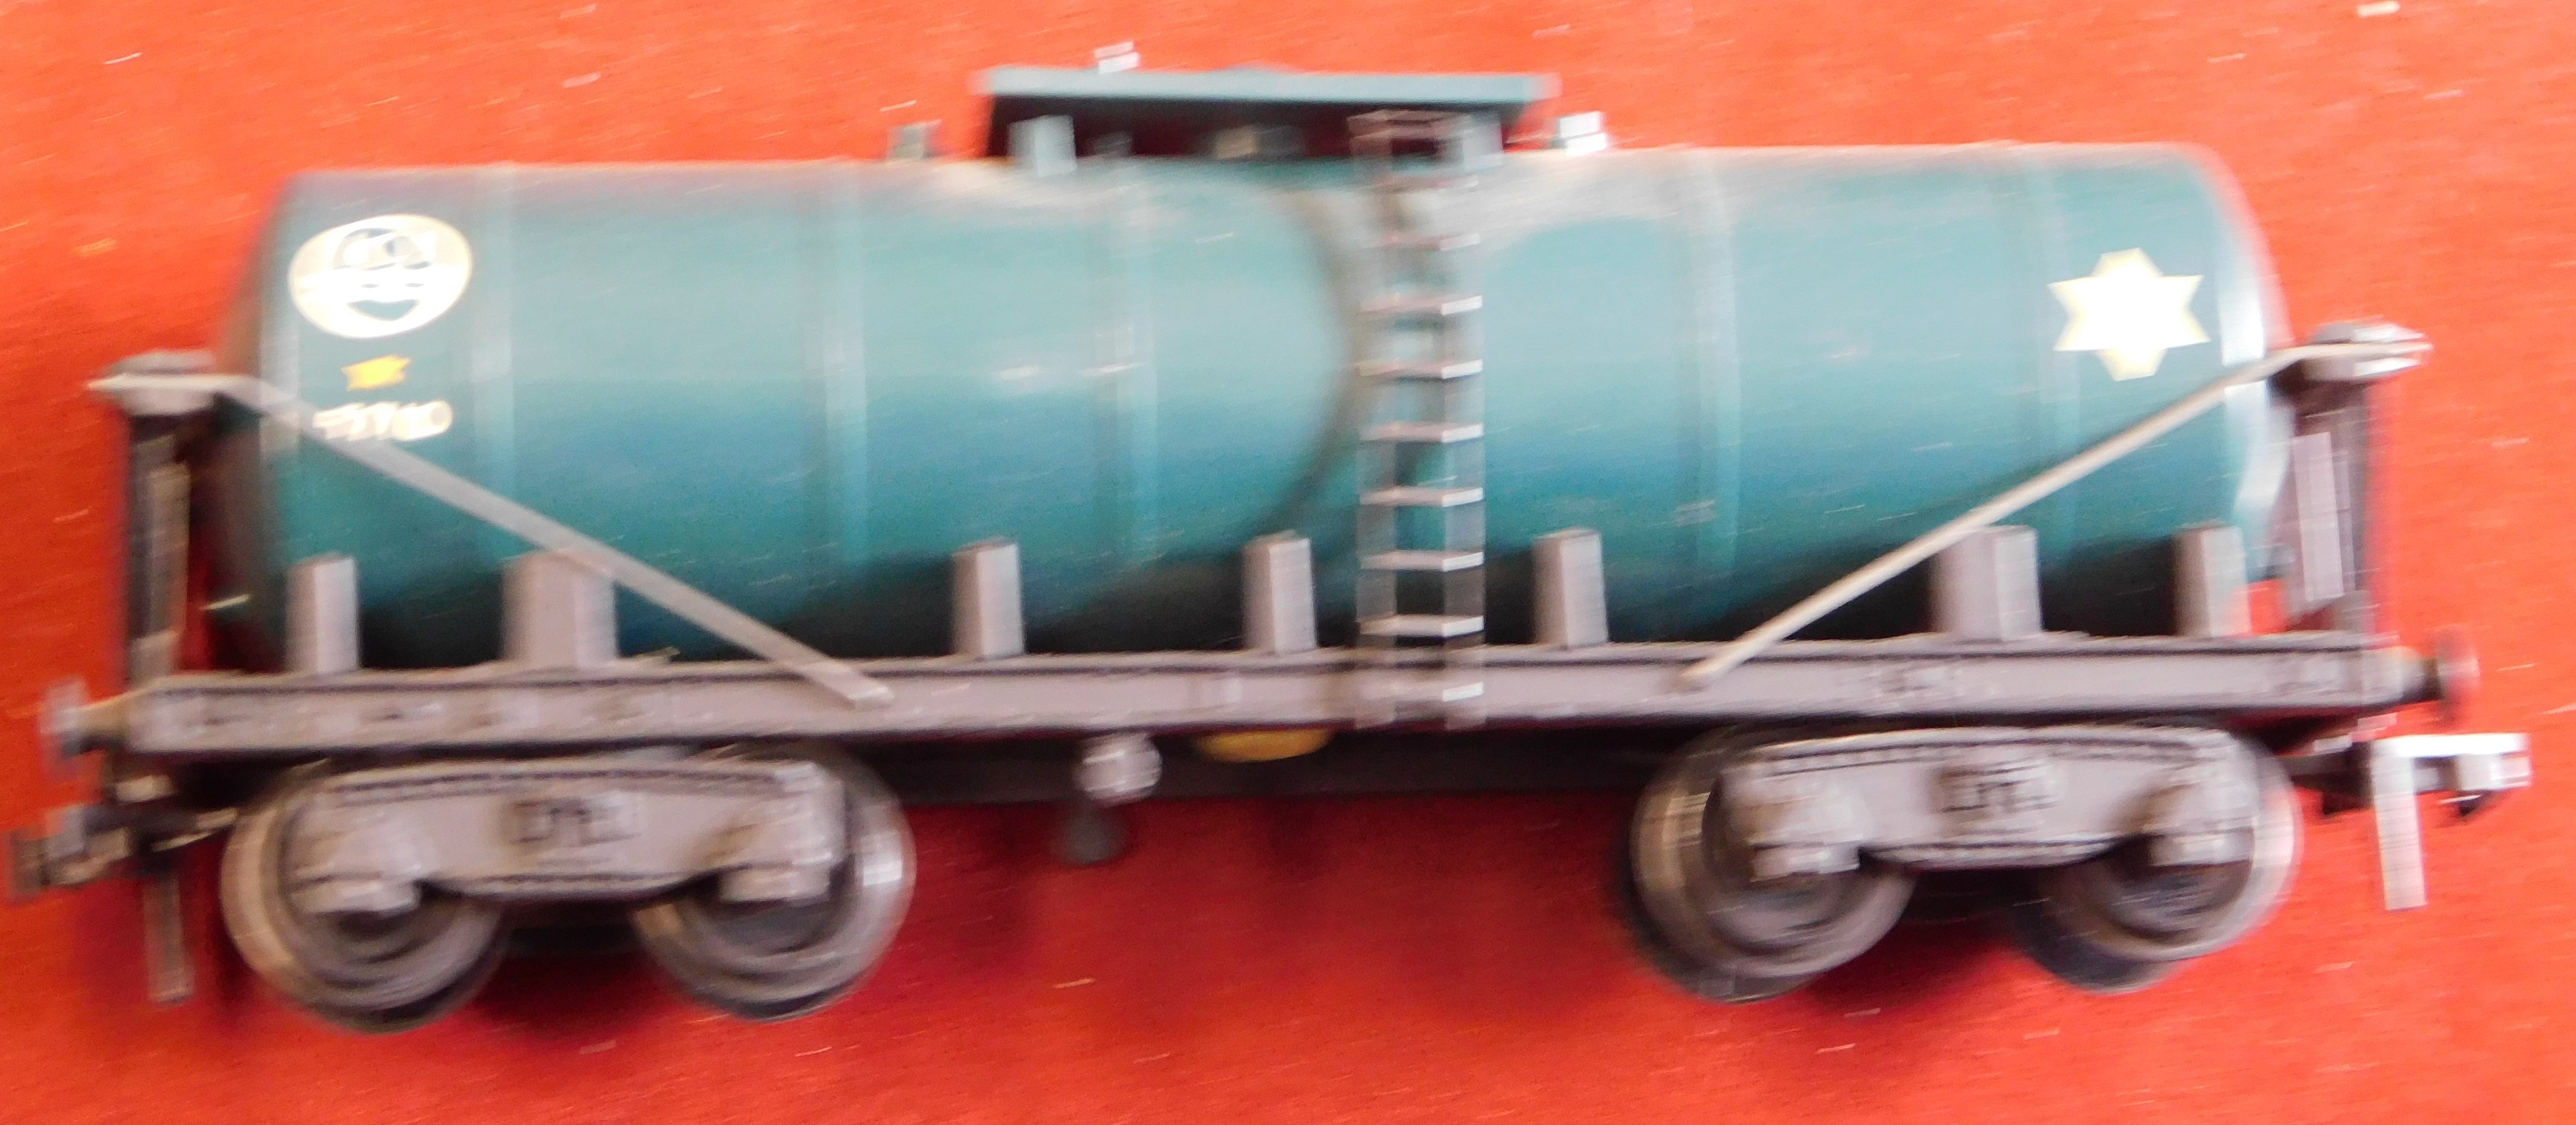 Hornby Dublo 'OO' Gauge 12x various coaches and wagons, pre-owned in box good condition - Image 5 of 9